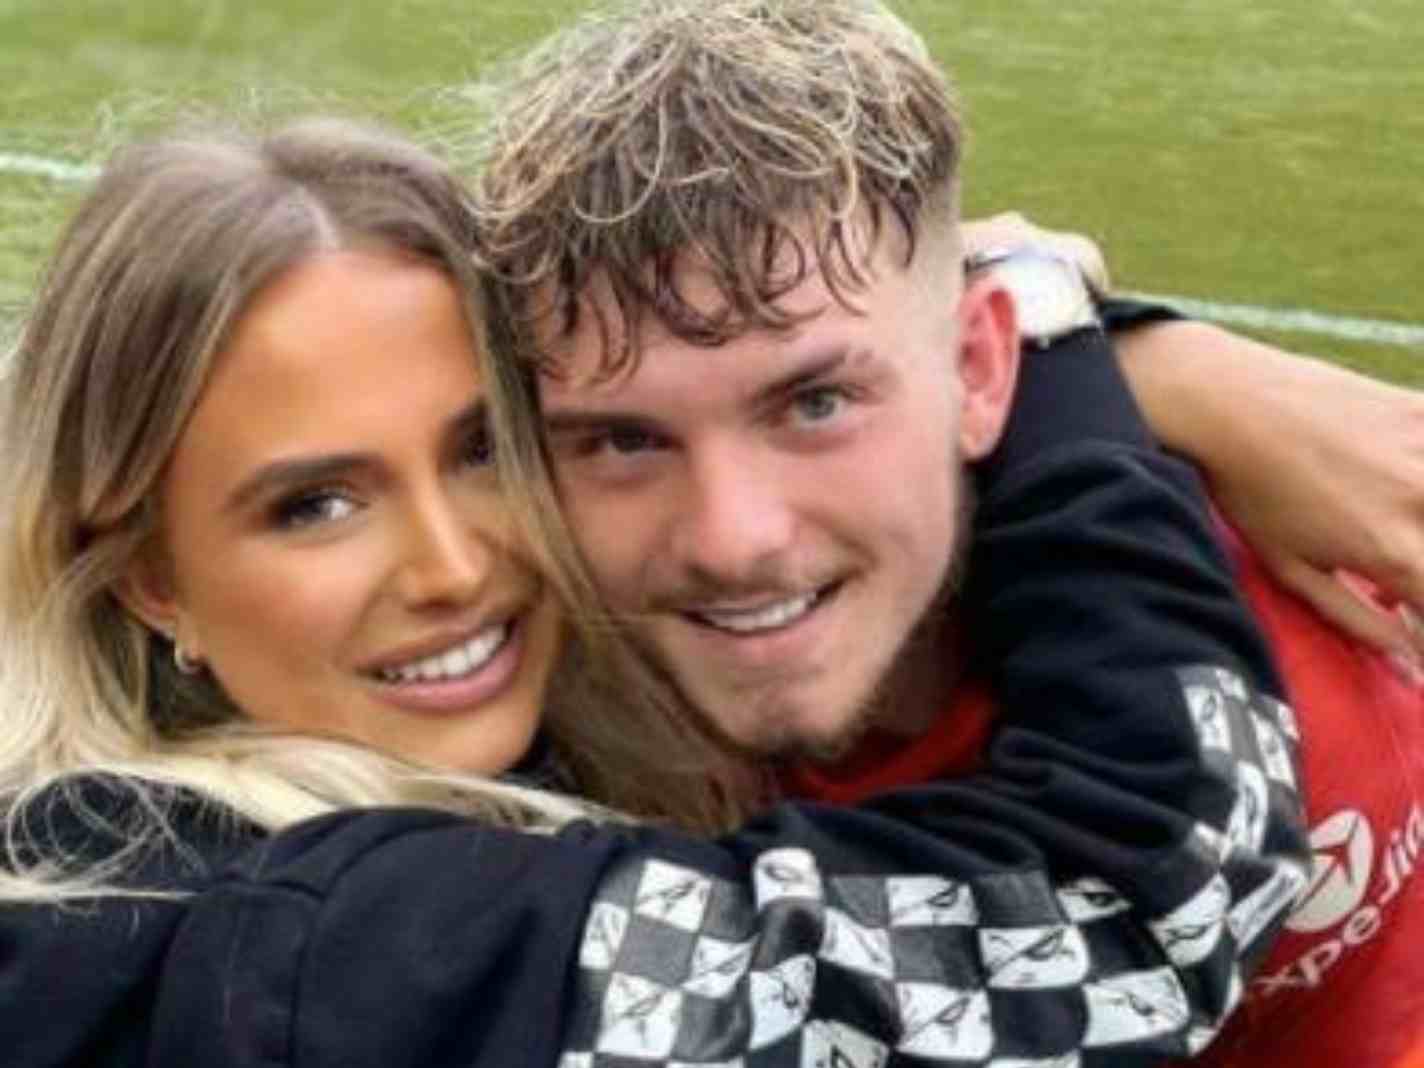 Not sure if LFC or Love Island as former GF of Harvey Elliott is now pregnant with another Liverpool player’s baby